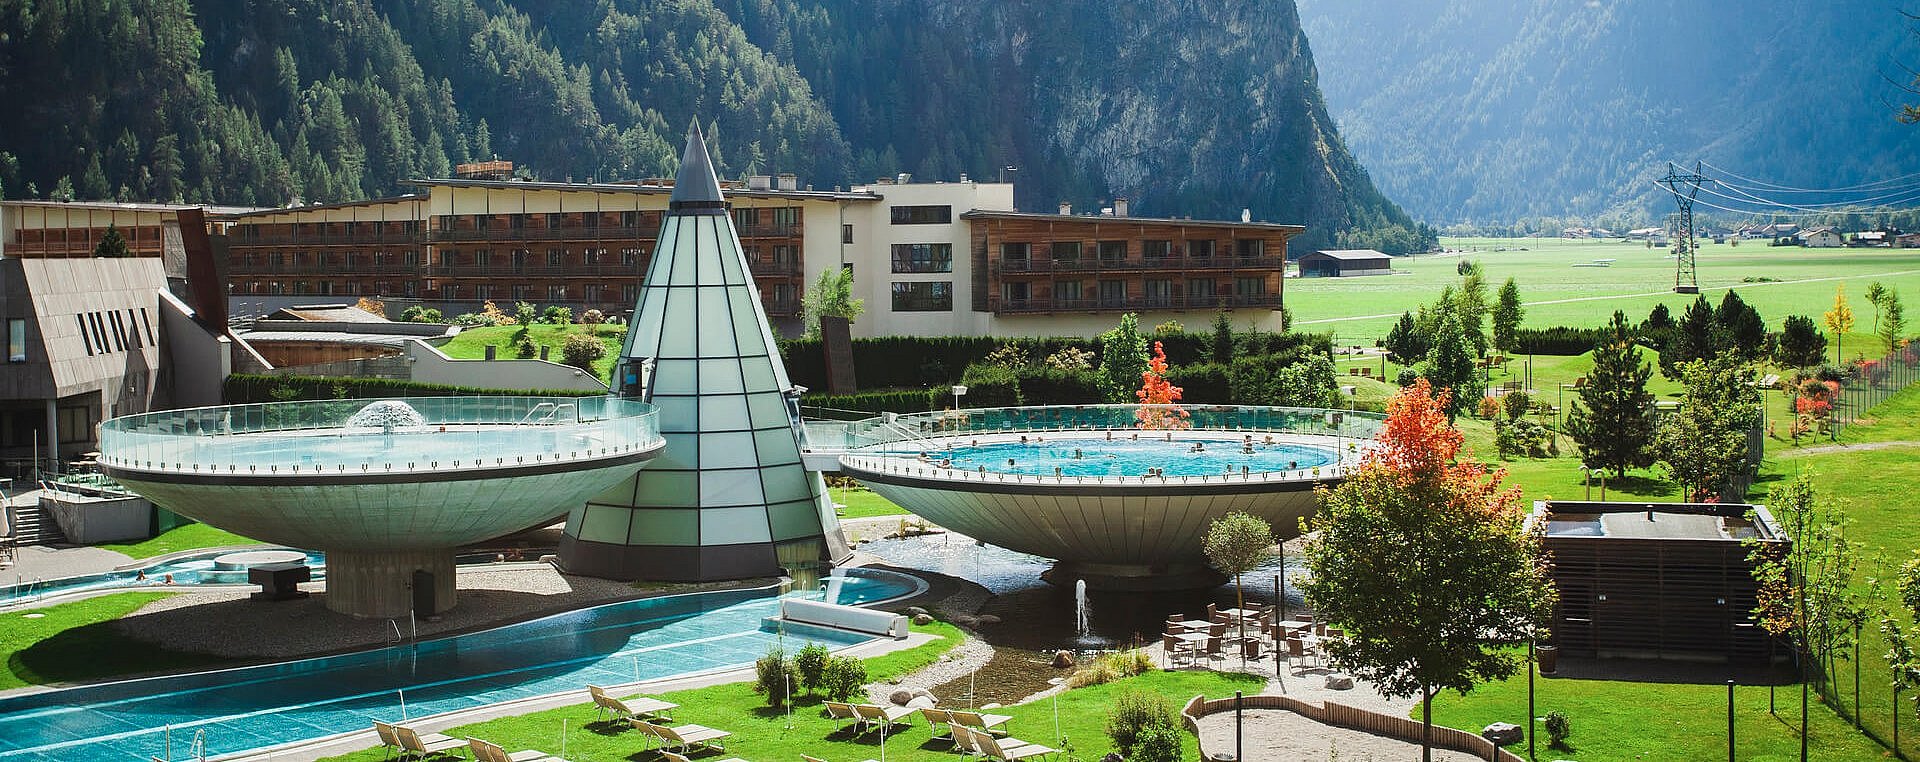 Your Spa Hotel In The Ötztal Valley Holiday With Aqua Dome Entrance Fee Hotel Rita